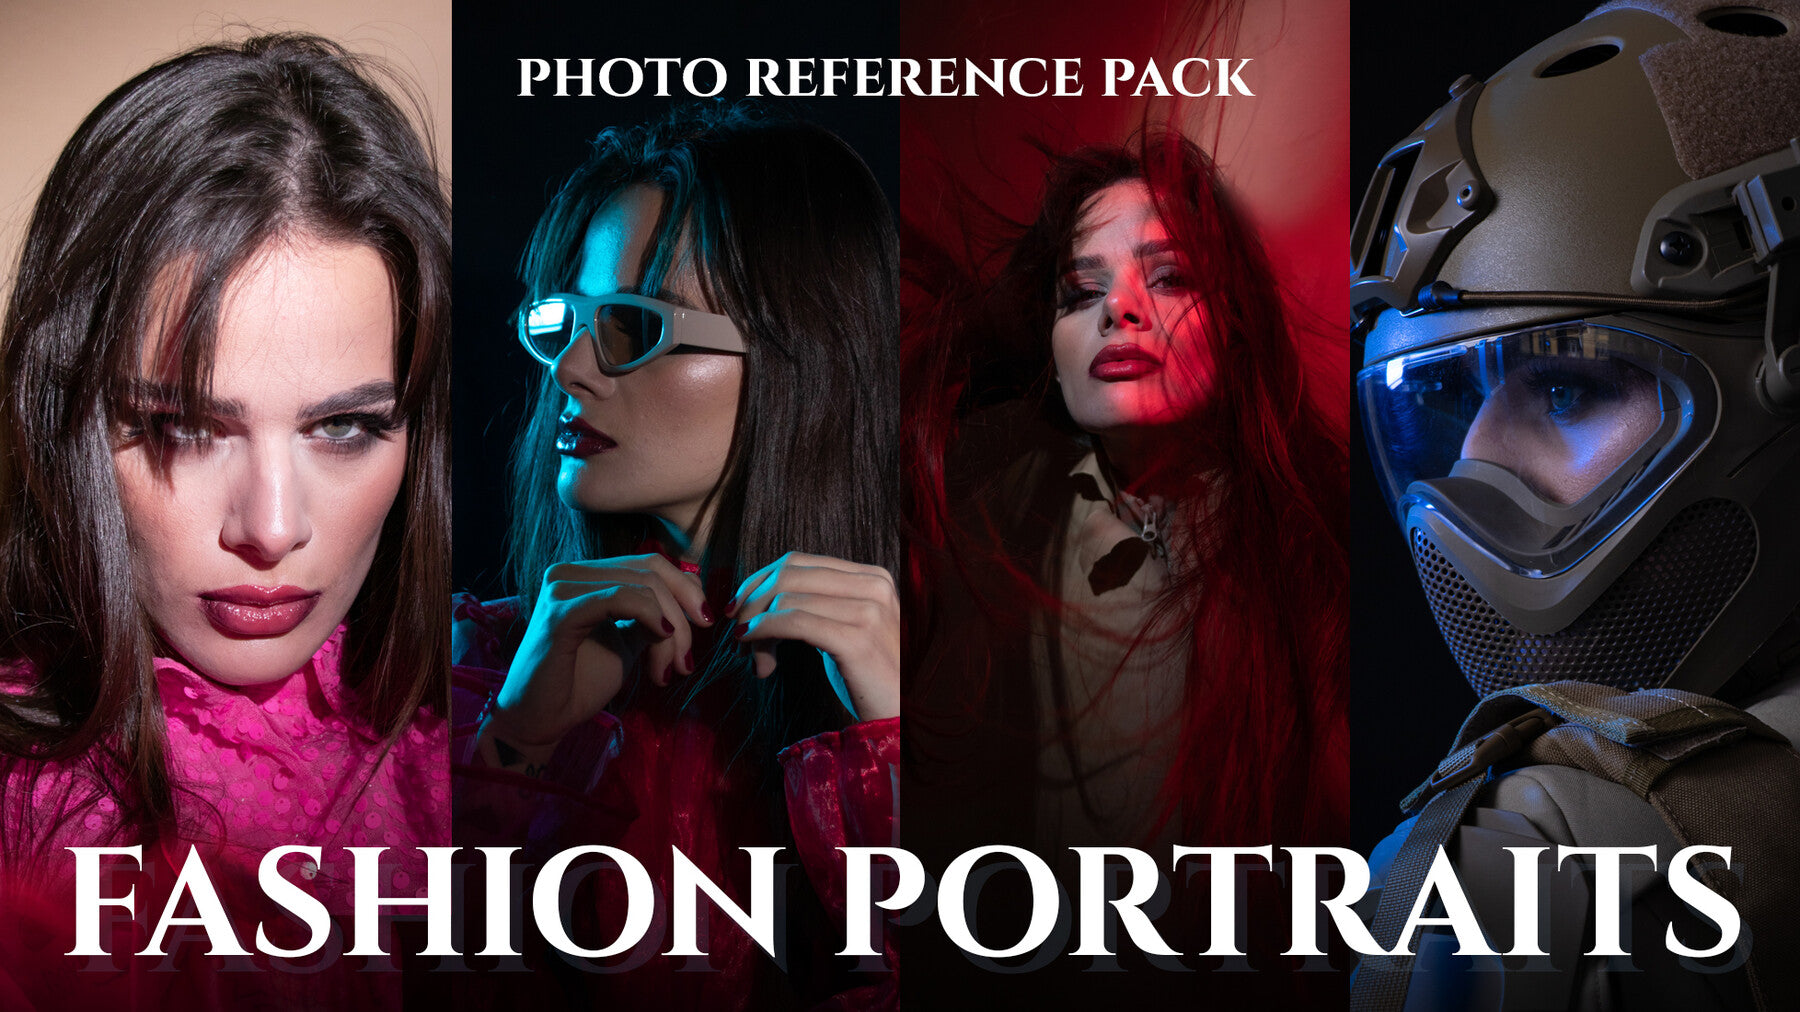 Fashion Portraits Reference Pack